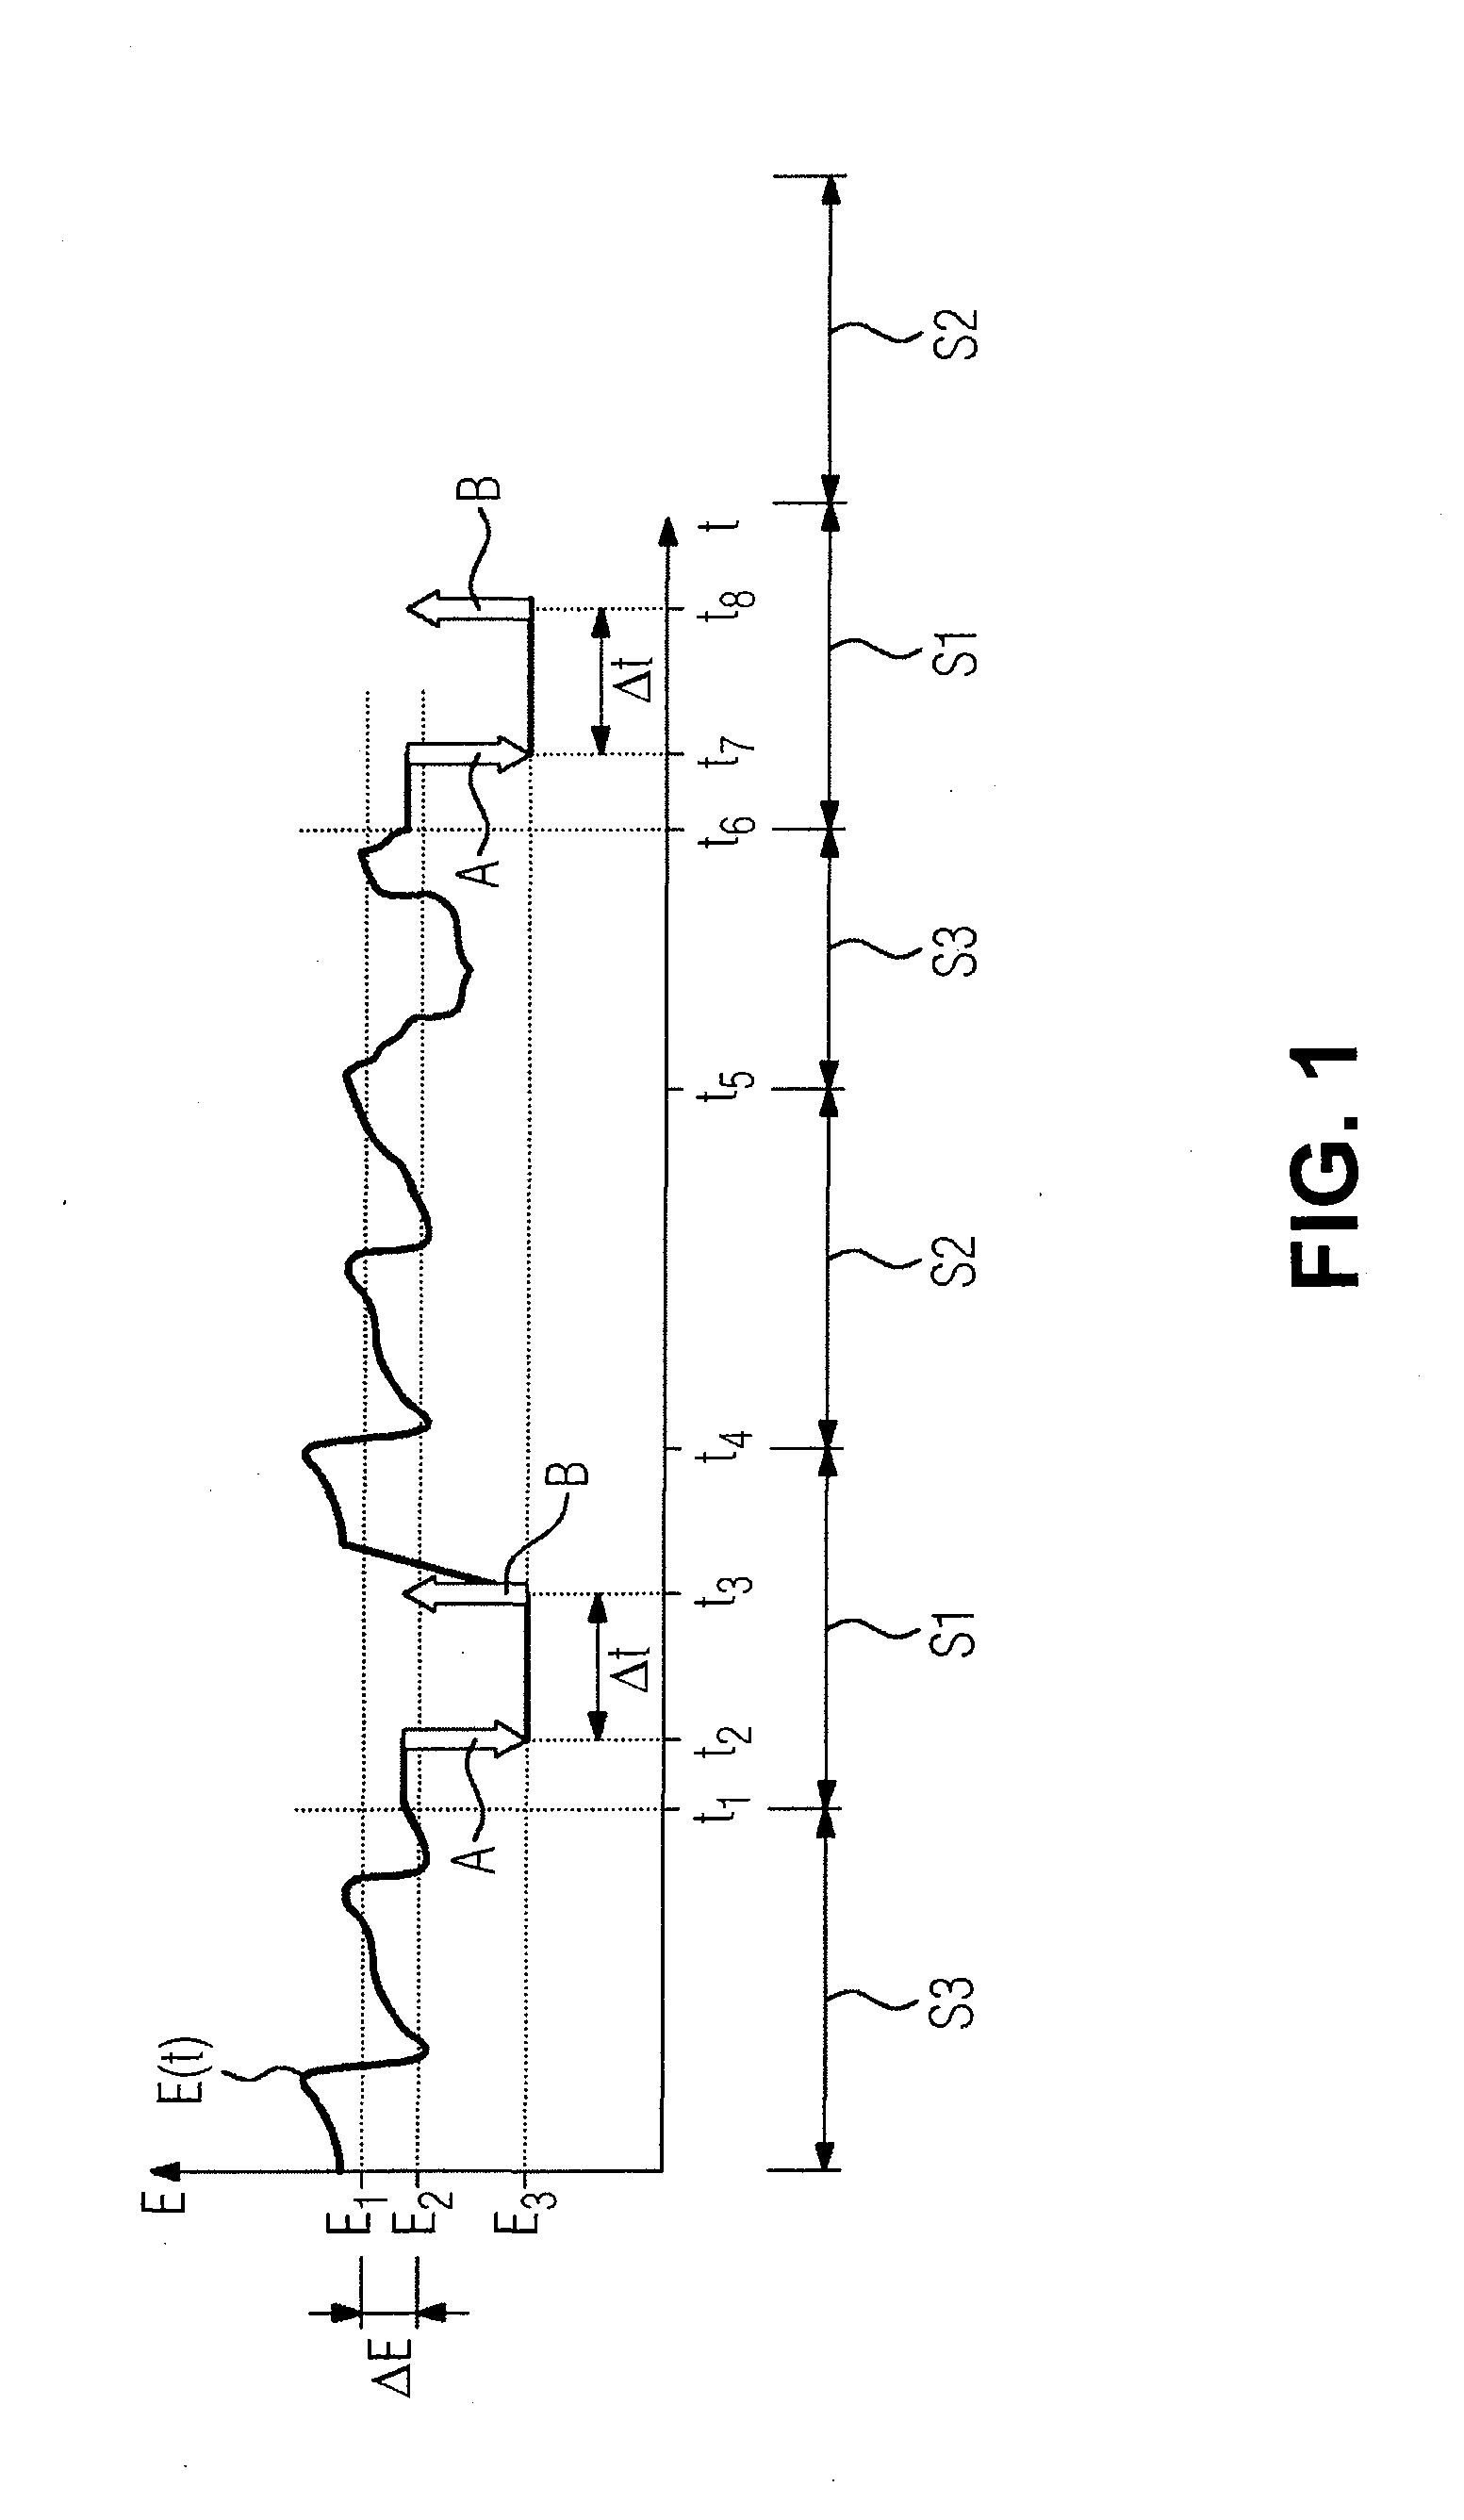 Method for controlling a technical apparatus